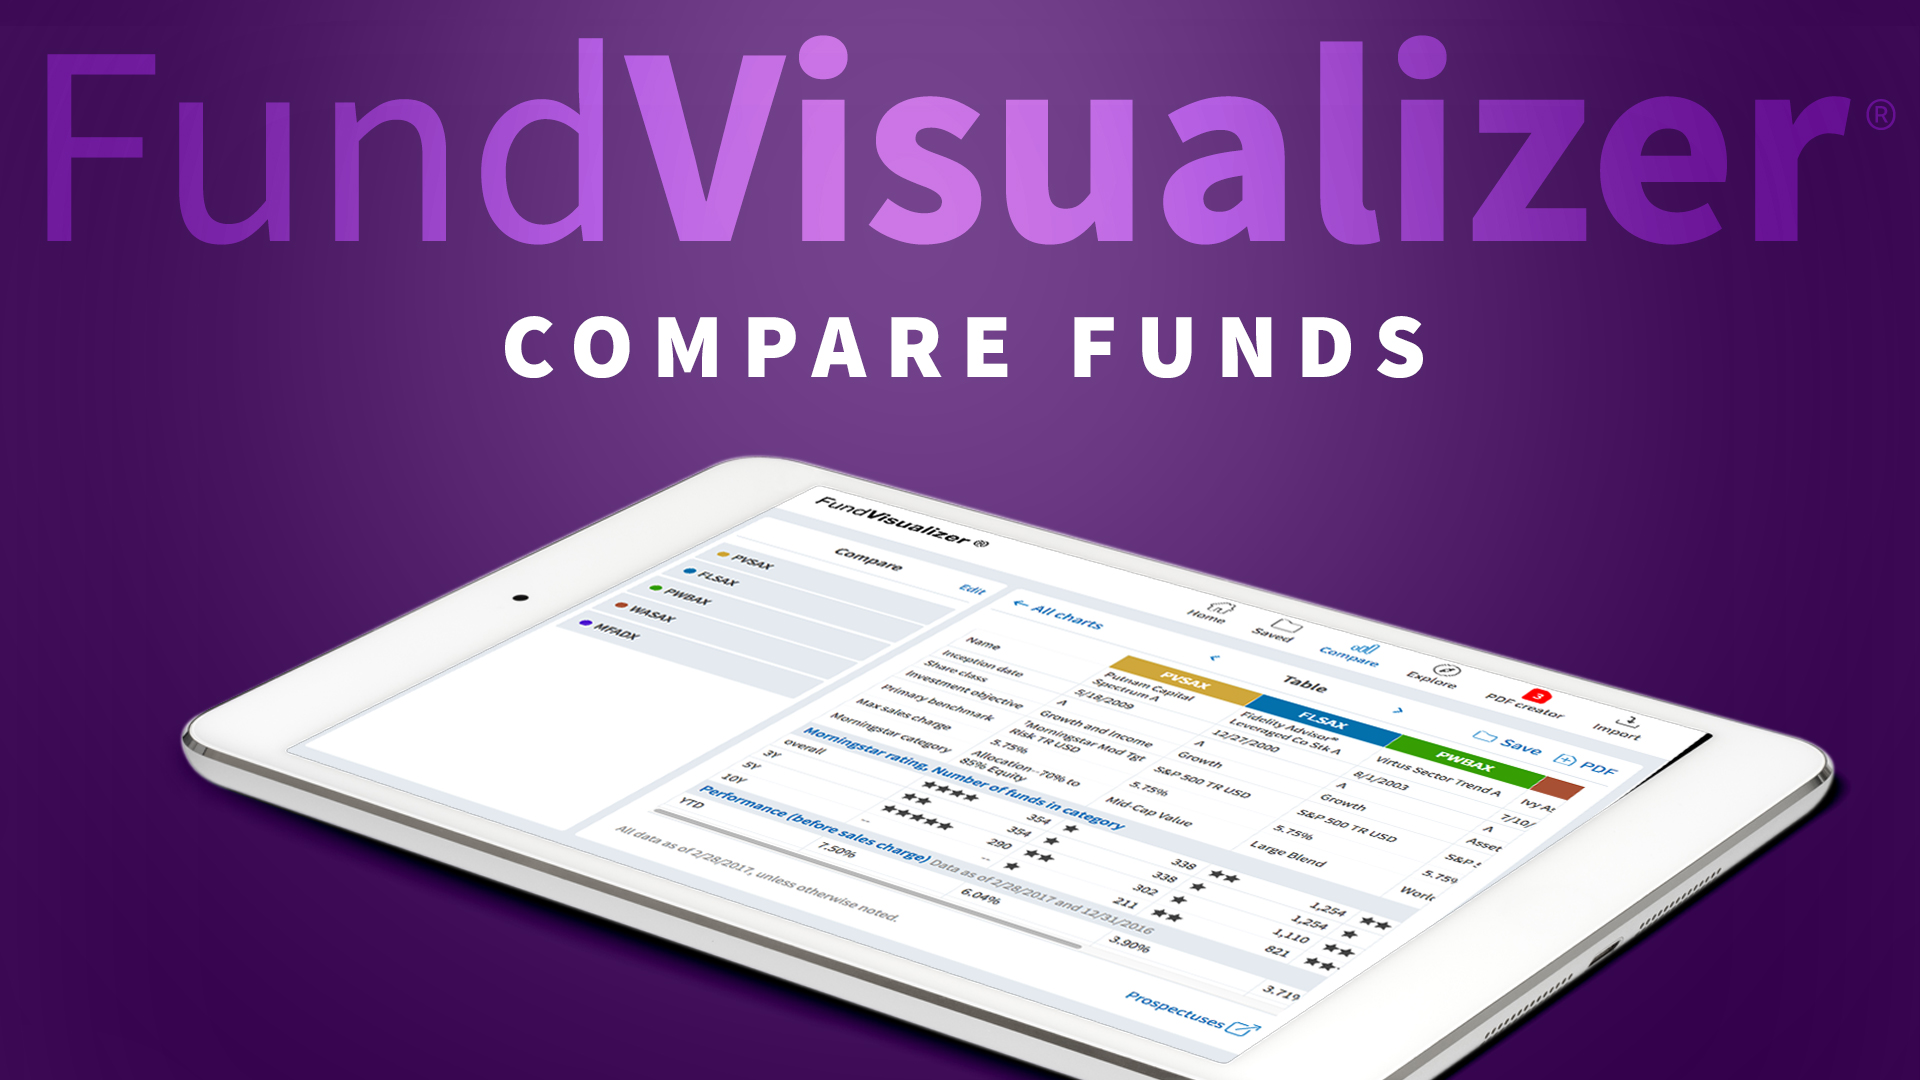 Fund and portfolio analysis for free, anytime, anywhere